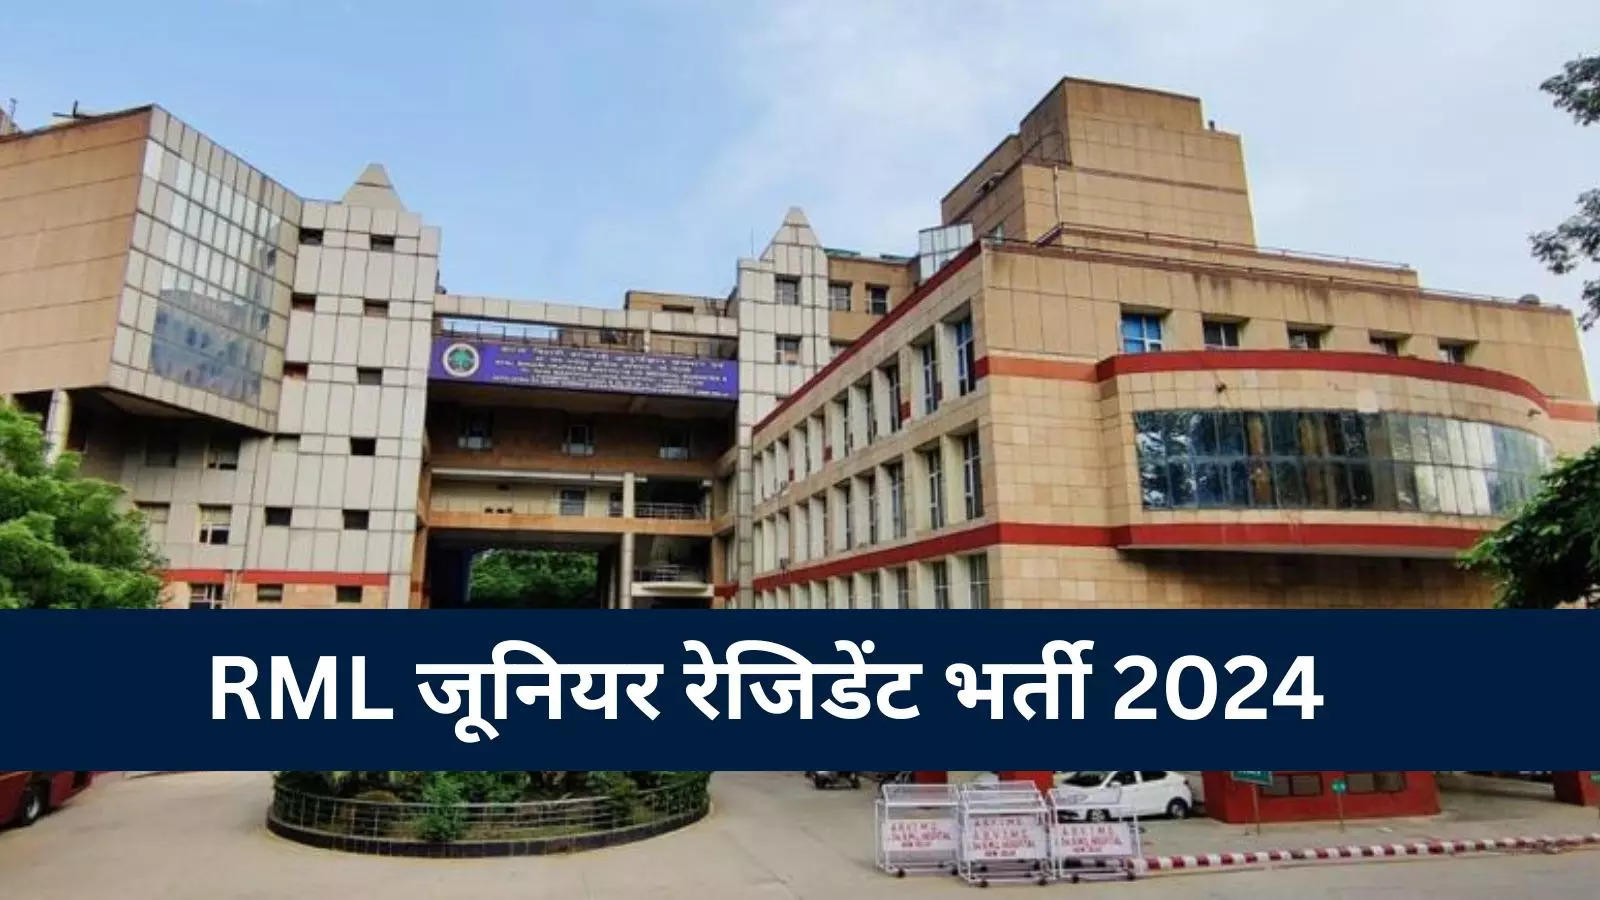 RML Hospital Recruitment 2024: Applications started for 255 posts of Junior Resident, apply offline like this